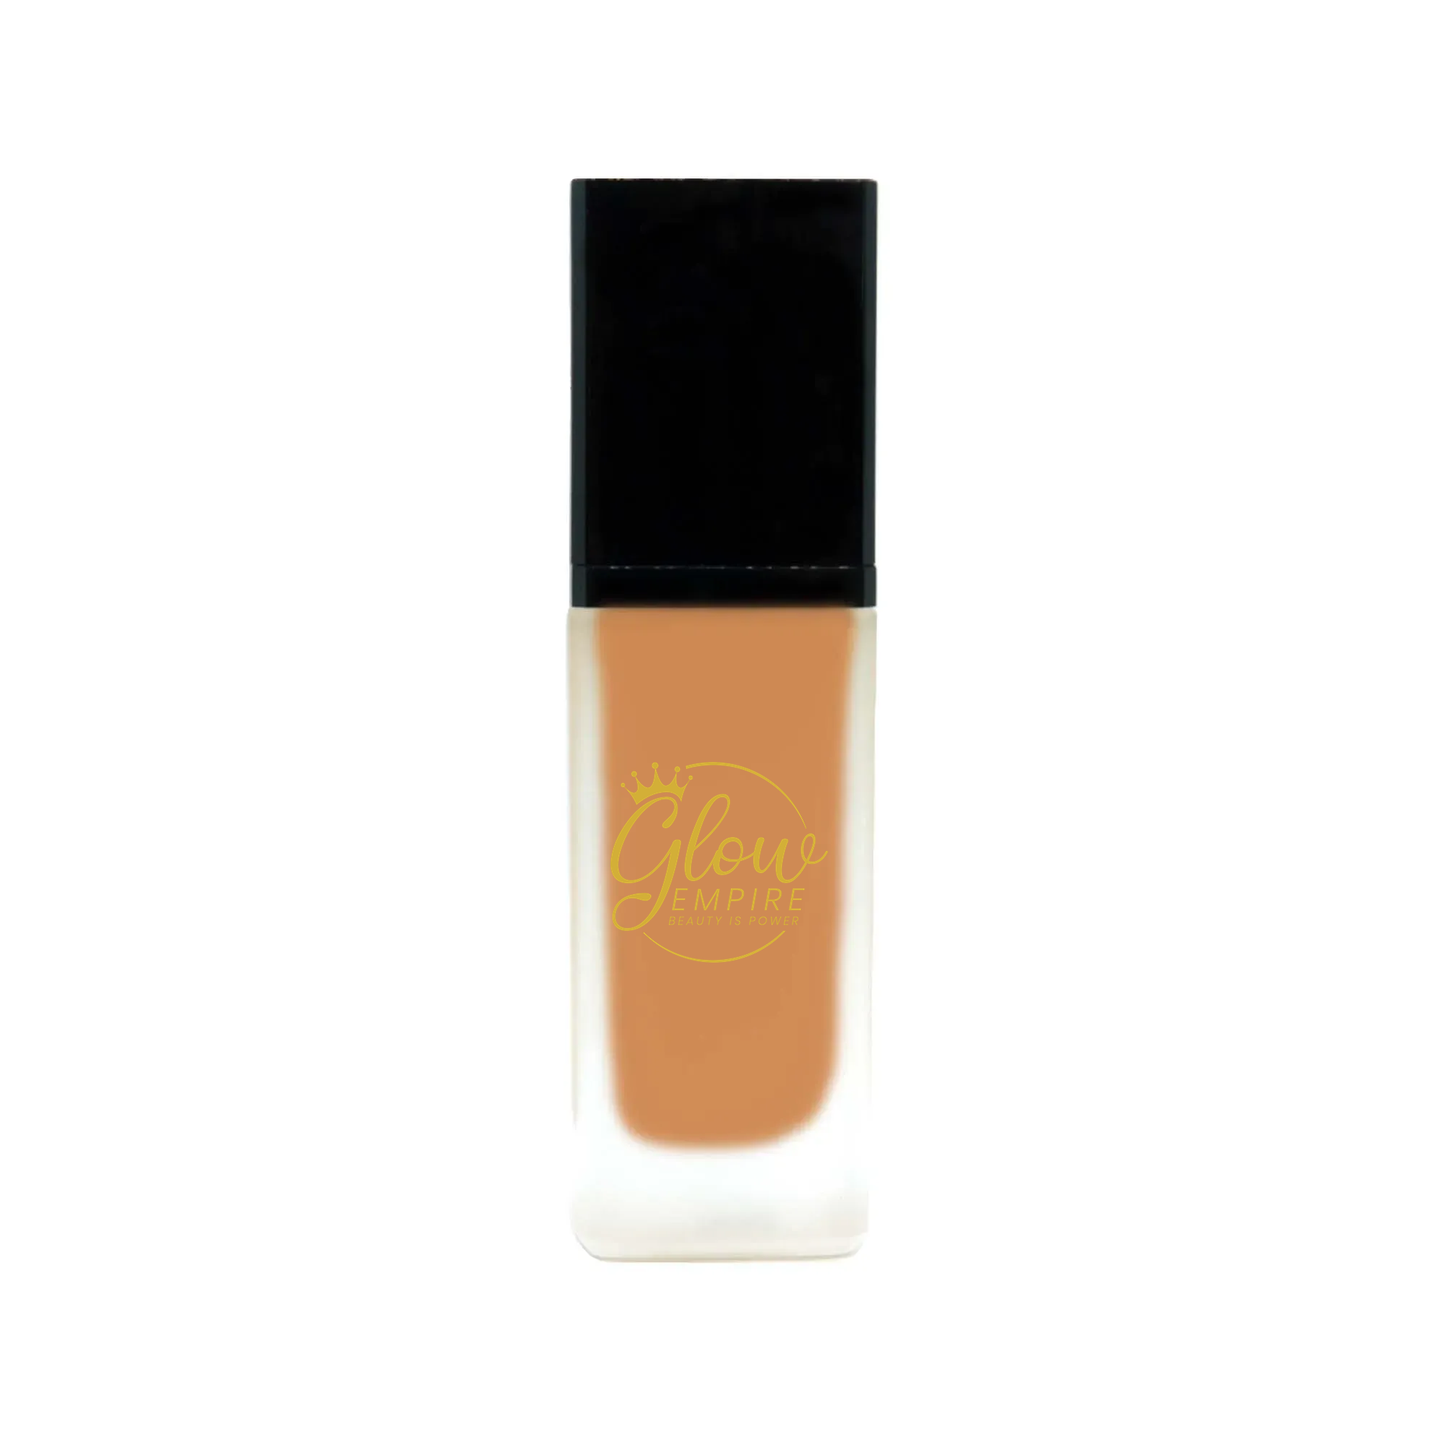 Foundation with SPF - Marigold